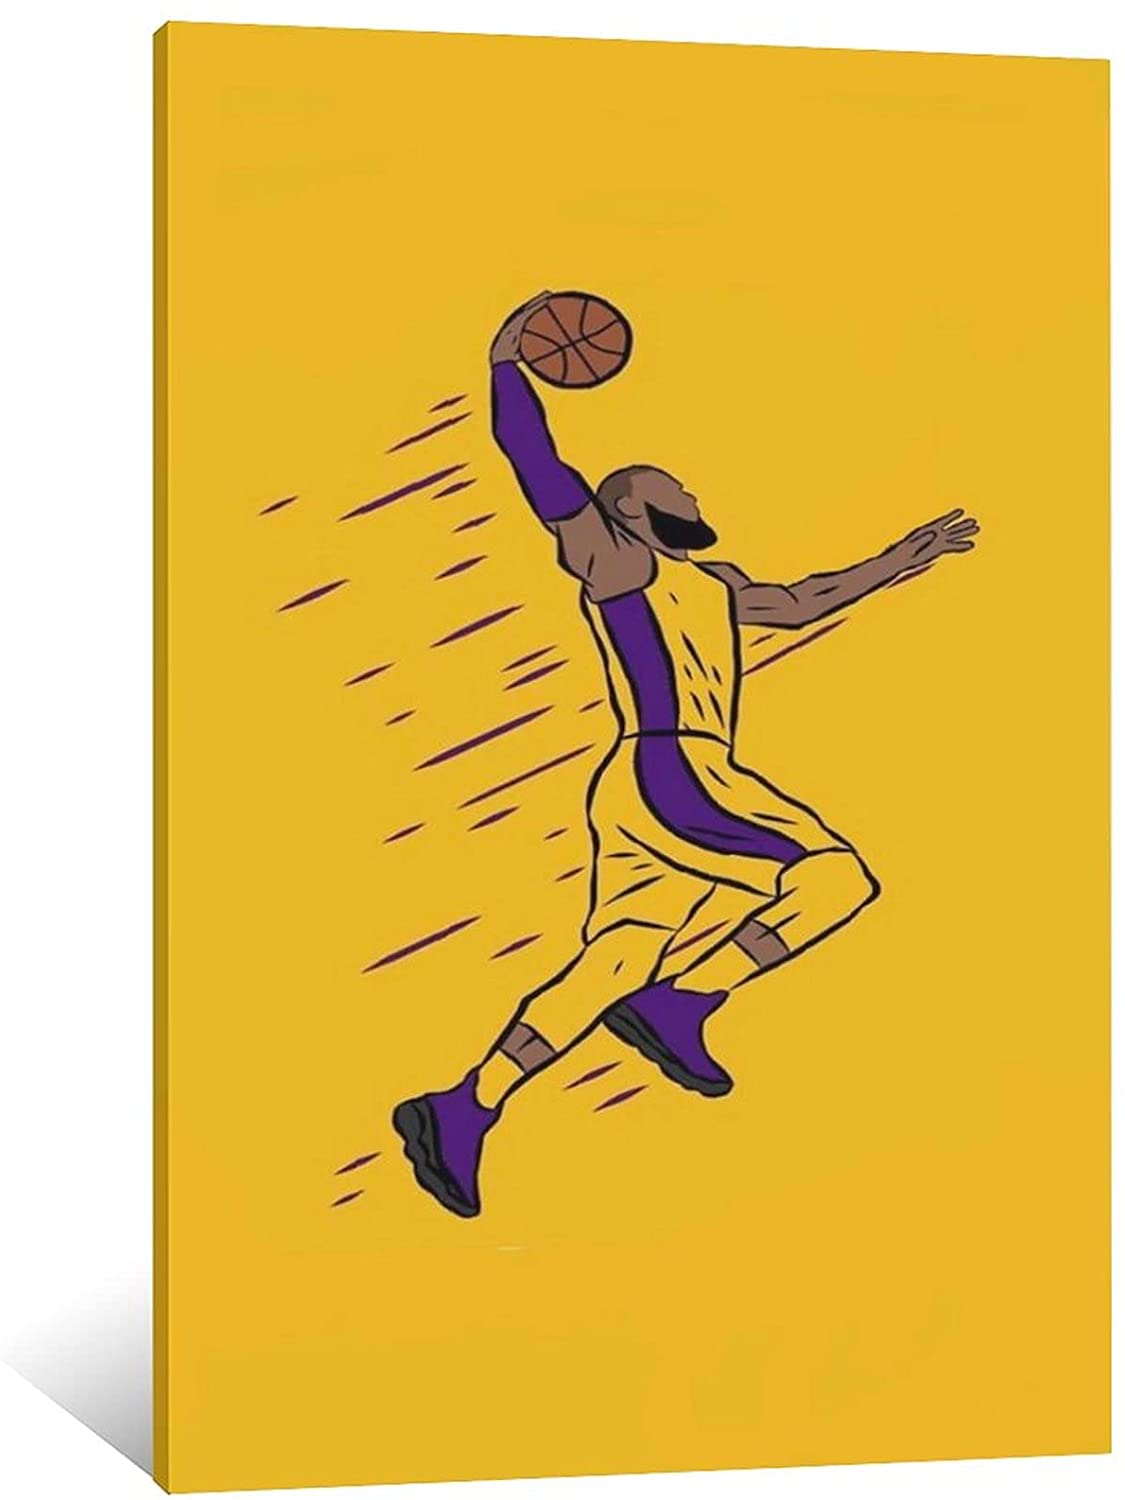 Cool Wallpaper Basketball Poster Decorative Painting Canvas Wall Art Living Room Posters Bedroom Painting 12×18inch(30×45cm): Posters & Prints